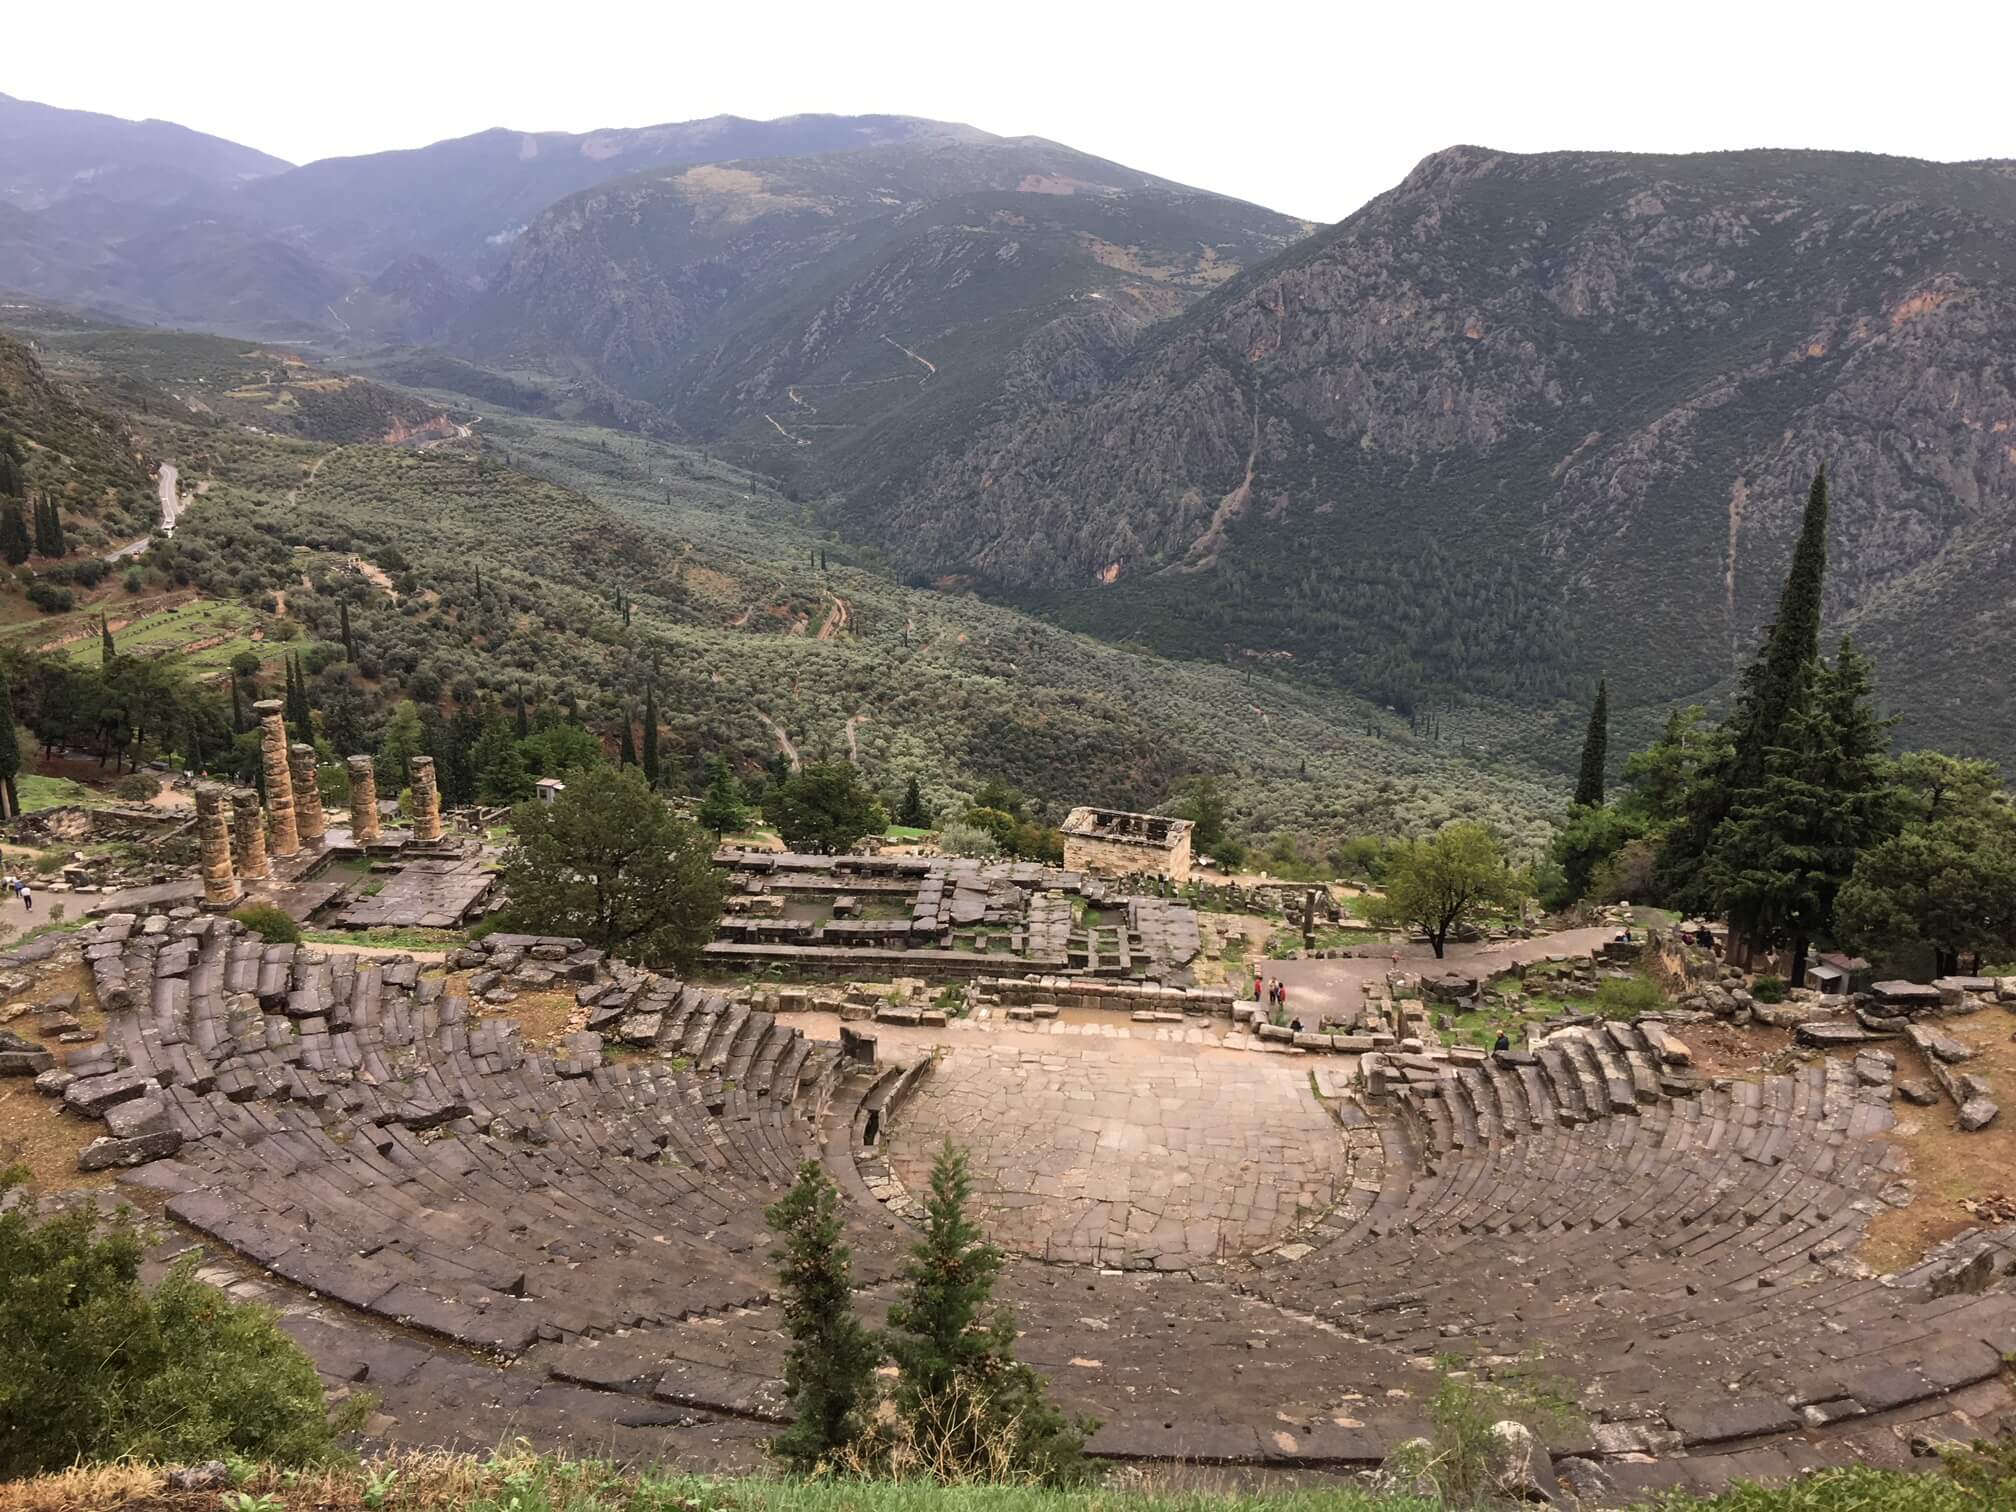 Taking my kids to the Oracle of Delphi